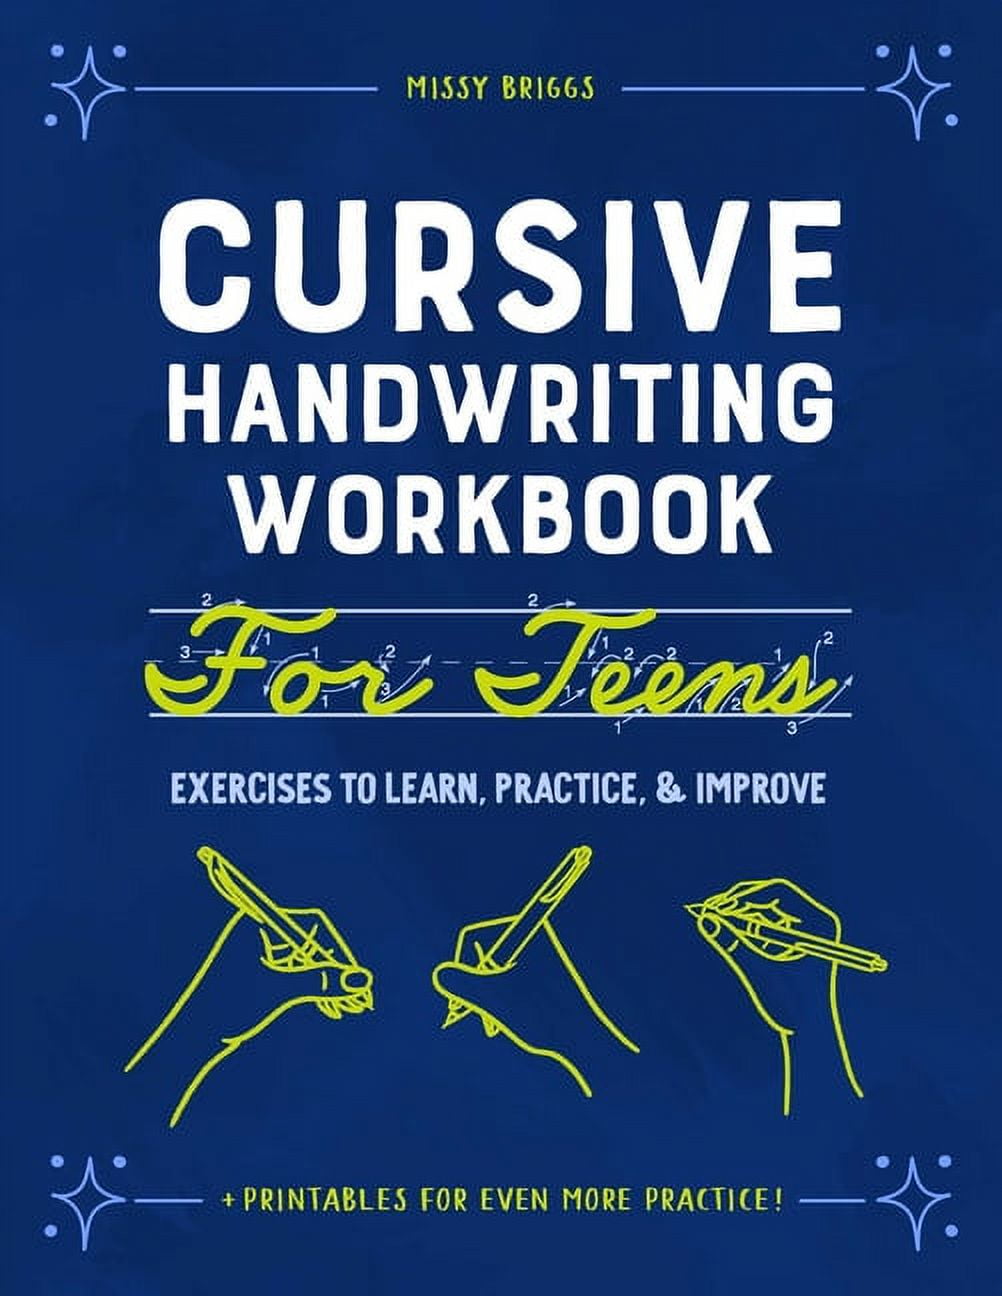 Cursive Writing Work Book: A Cursive Writing Practice Workbook for Young Adults and Teens - Tracing Laid Out Pages to Practice Your Calligraphy Letters, Words and General Writing Upper and Lower Case. [Book]